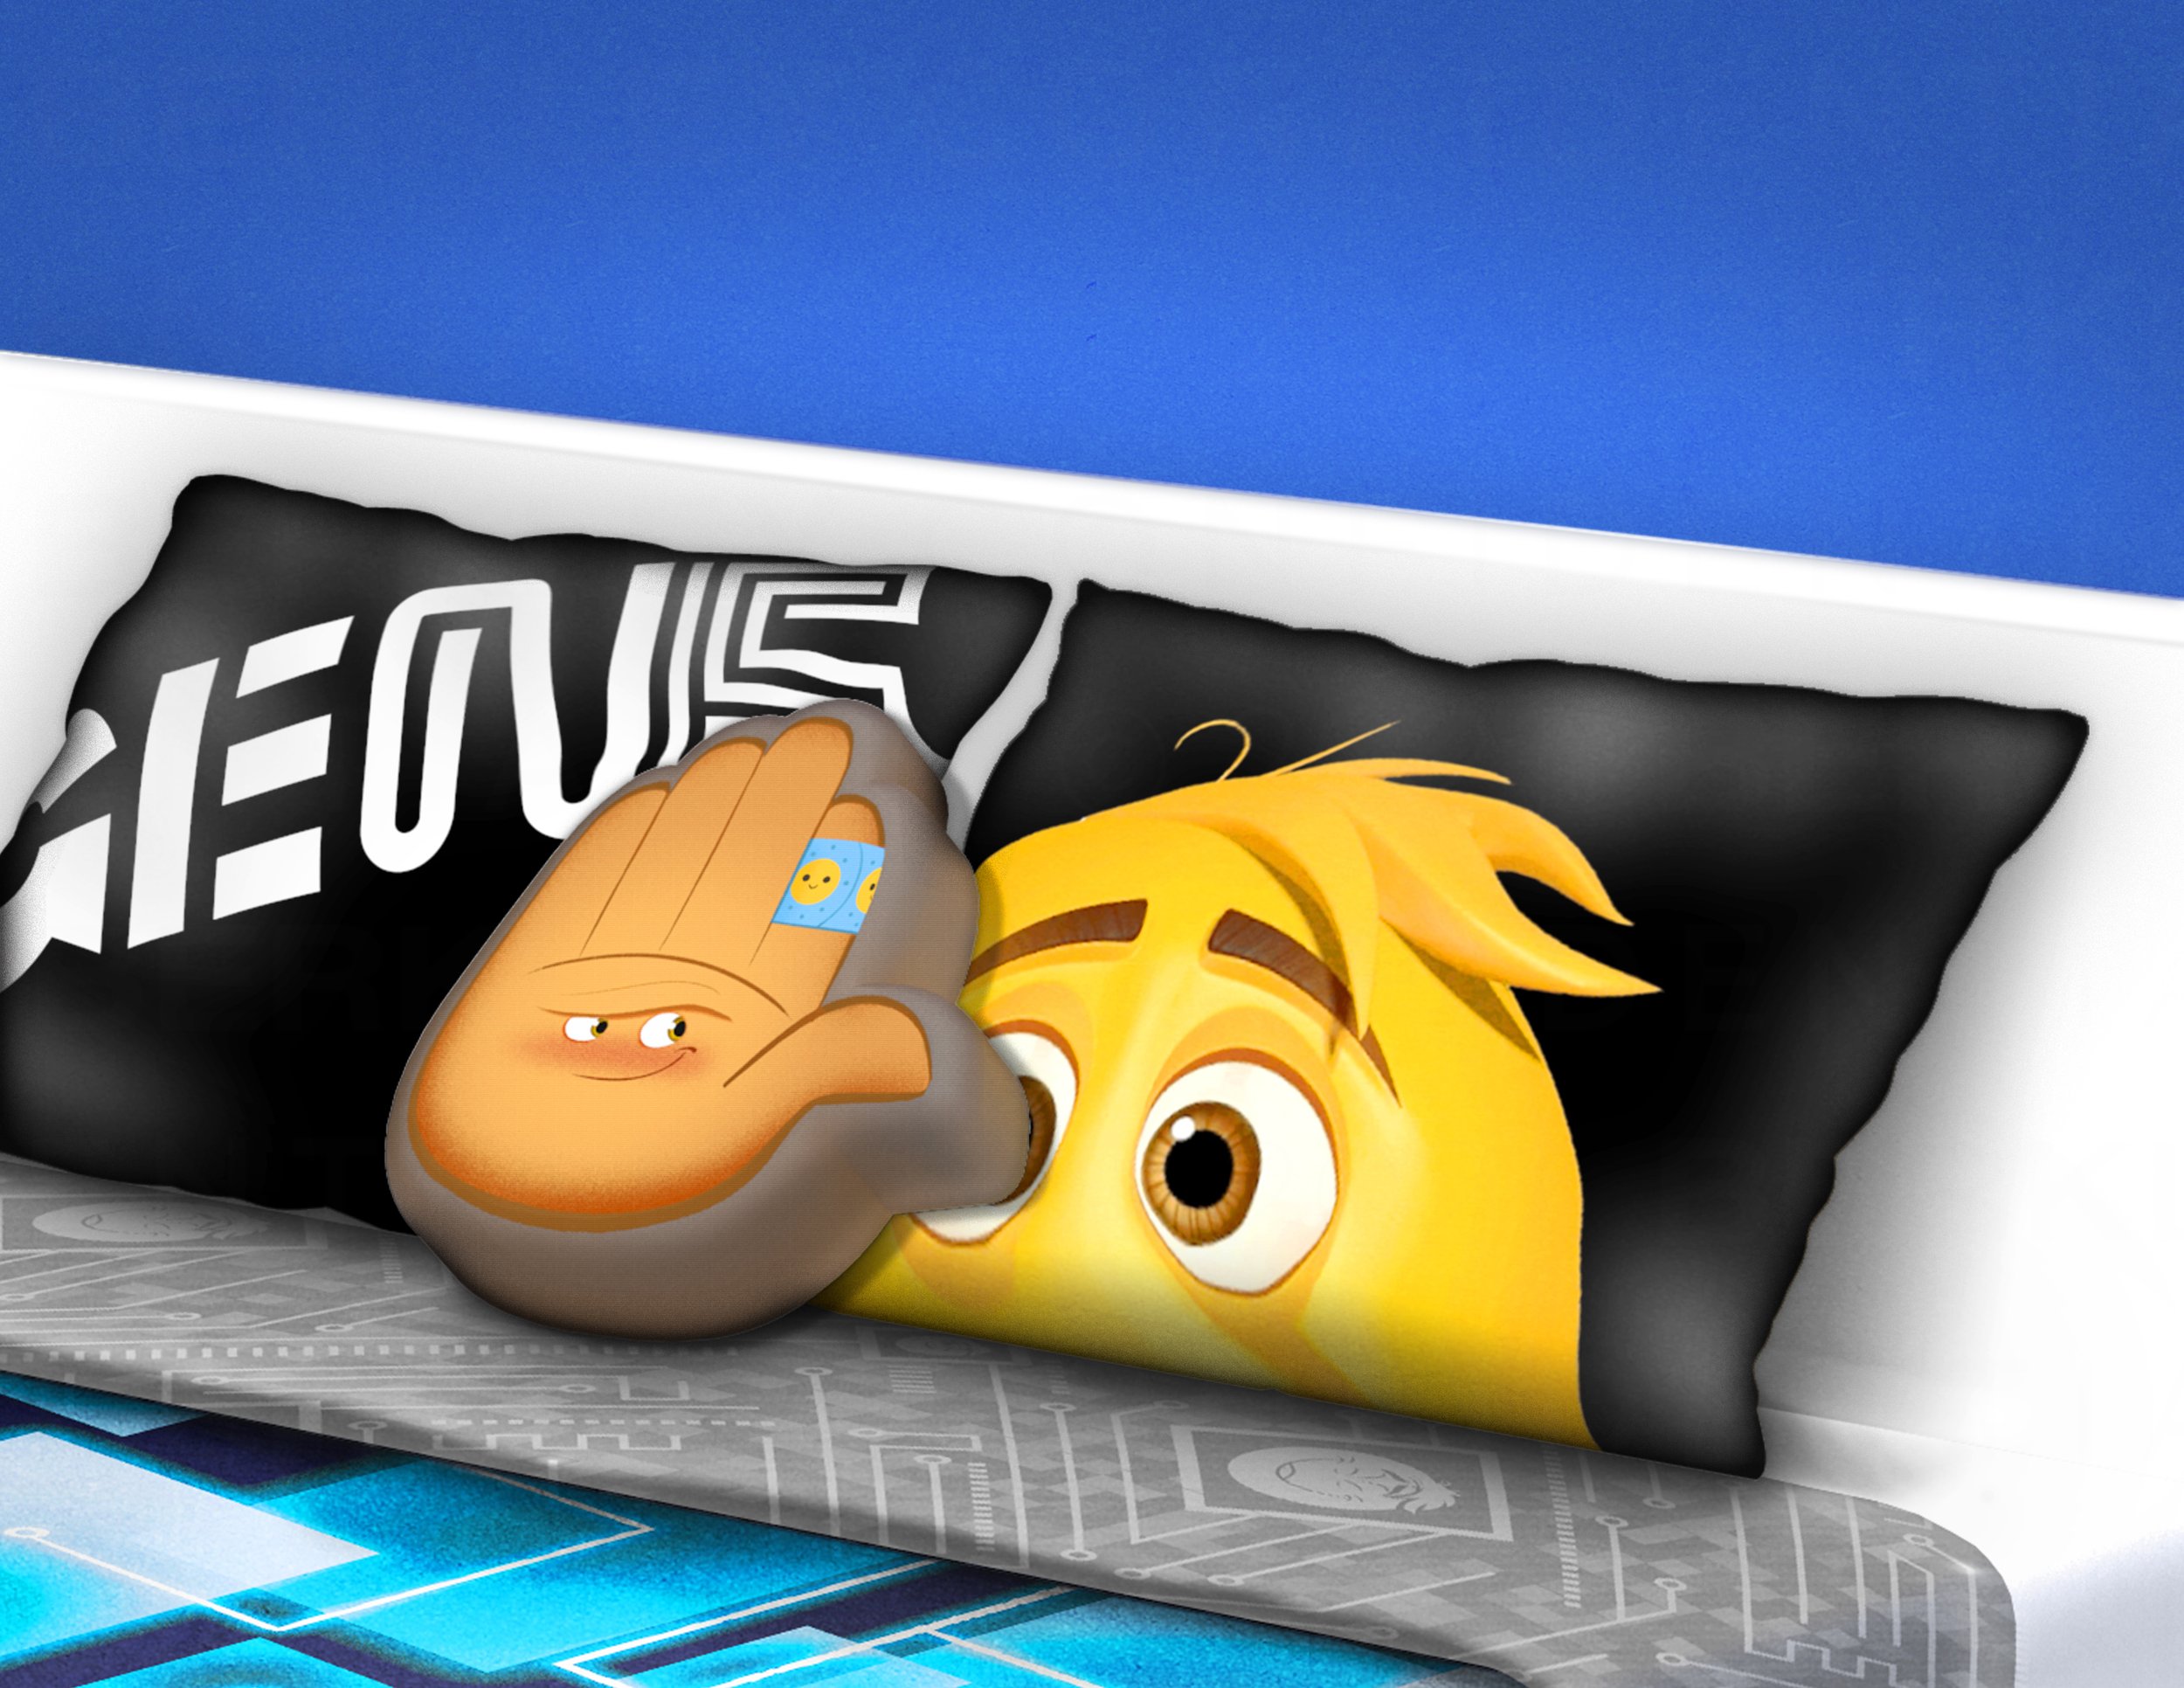 The Emoji Movie - Licensed Environment & Products